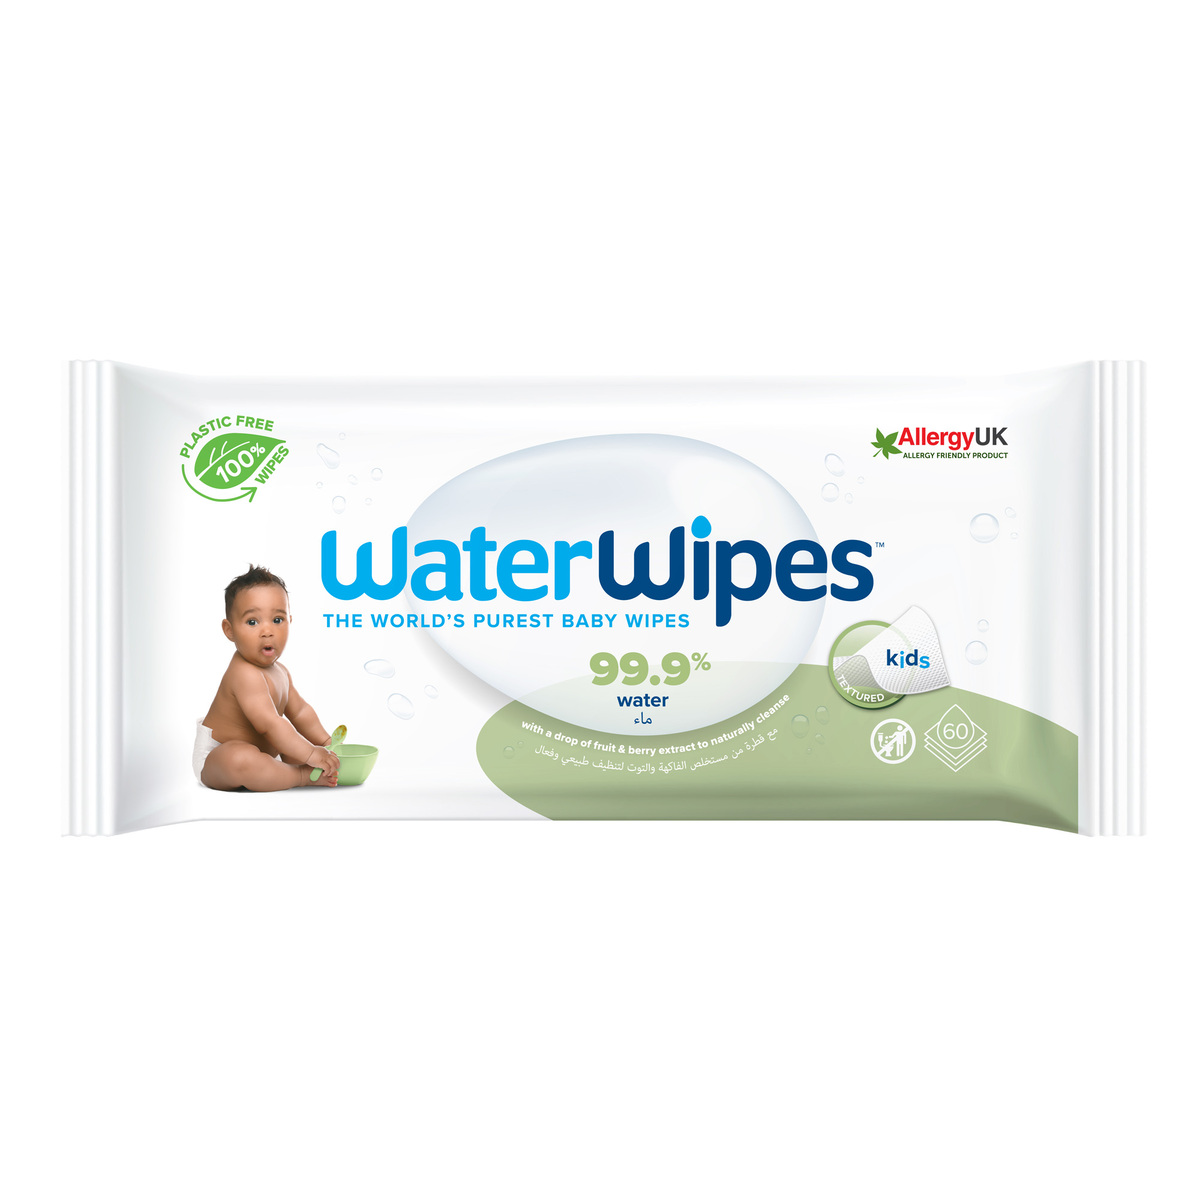 Water Wipes Soapberry Extract Baby Wipes 60pcs Online at Best Price, Baby  Wipes